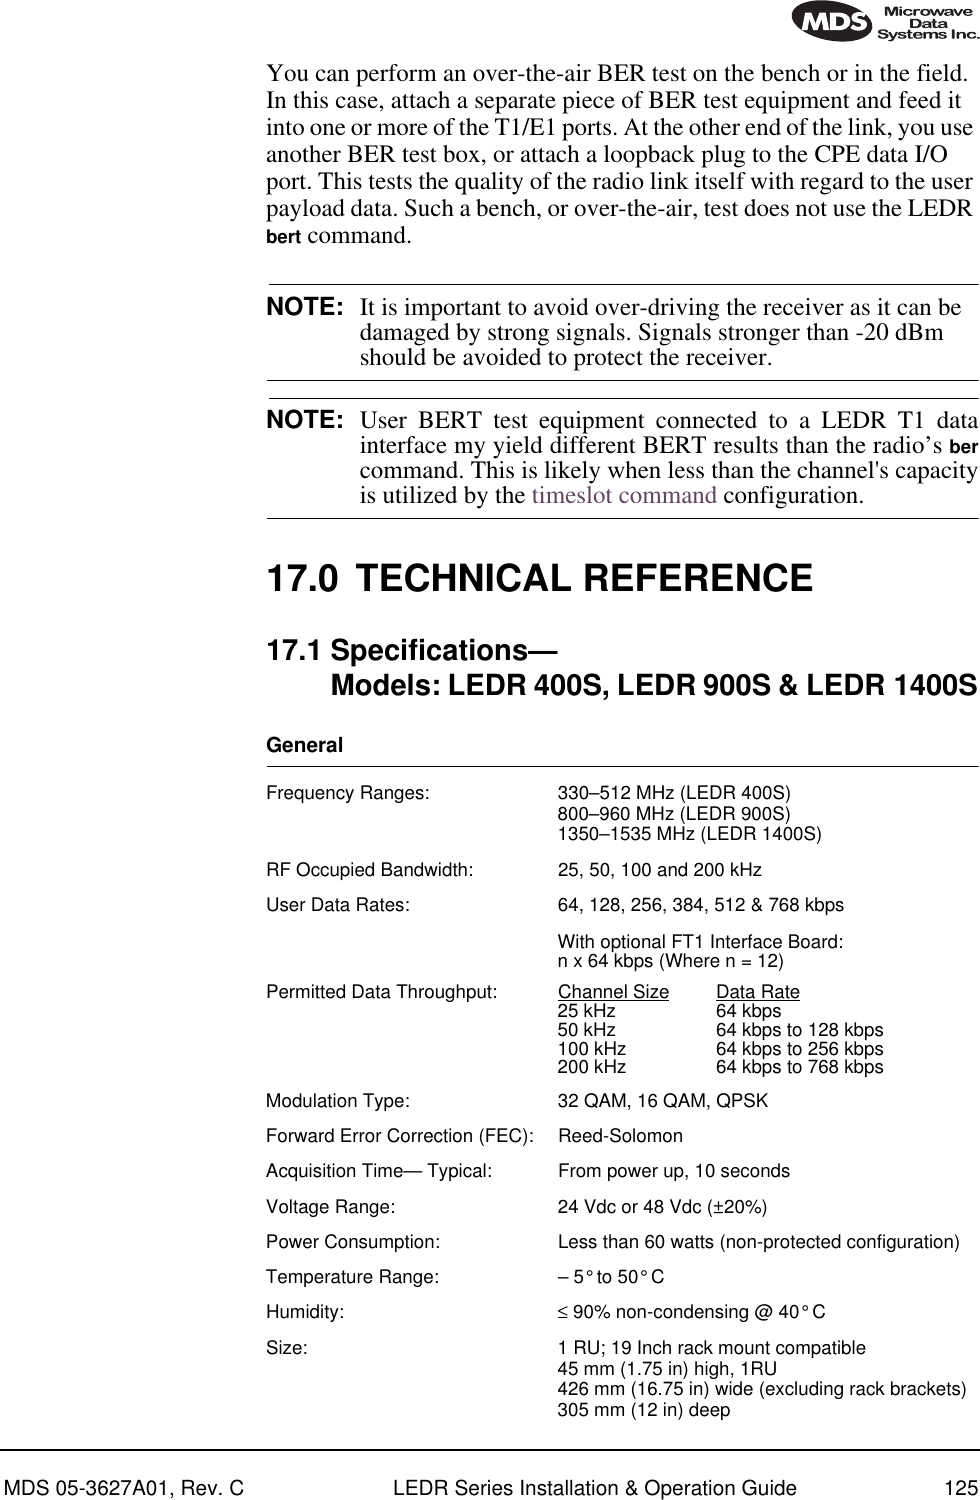 MDS 05-3627A01, Rev. C LEDR Series Installation &amp; Operation Guide 125You can perform an over-the-air BER test on the bench or in the field. In this case, attach a separate piece of BER test equipment and feed it into one or more of the T1/E1 ports. At the other end of the link, you use another BER test box, or attach a loopback plug to the CPE data I/O port. This tests the quality of the radio link itself with regard to the user payload data. Such a bench, or over-the-air, test does not use the LEDR bert command.NOTE: It is important to avoid over-driving the receiver as it can be damaged by strong signals. Signals stronger than -20 dBm should be avoided to protect the receiver.NOTE: User BERT test equipment connected to a LEDR T1 datainterface my yield different BERT results than the radio’s bercommand. This is likely when less than the channel&apos;s capacityis utilized by the timeslot command configuration.17.0 TECHNICAL REFERENCE17.1 Specifications—Models: LEDR 400S, LEDR 900S &amp; LEDR 1400SGeneral Frequency Ranges: 330–512 MHz (LEDR 400S)800–960 MHz (LEDR 900S)1350–1535 MHz (LEDR 1400S)RF Occupied Bandwidth: 25, 50, 100 and 200 kHzUser Data Rates: 64, 128, 256, 384, 512 &amp; 768 kbpsWith optional FT1 Interface Board: n x 64 kbps (Where n = 12)Permitted Data Throughput: Channel Size Data Rate25 kHz 64 kbps50 kHz 64 kbps to 128 kbps100 kHz 64 kbps to 256 kbps200 kHz 64 kbps to 768 kbpsModulation Type: 32 QAM, 16 QAM, QPSKForward Error Correction (FEC): Reed-SolomonAcquisition Time— Typical: From power up, 10 secondsVoltage Range: 24 Vdc or 48 Vdc (±20%)Power Consumption: Less than 60 watts (non-protected configuration)Temperature Range: – 5° to 50° CHumidity: ≤ 90% non-condensing @ 40° CSize: 1 RU; 19 Inch rack mount compatible45 mm (1.75 in) high, 1RU426 mm (16.75 in) wide (excluding rack brackets)305 mm (12 in) deep